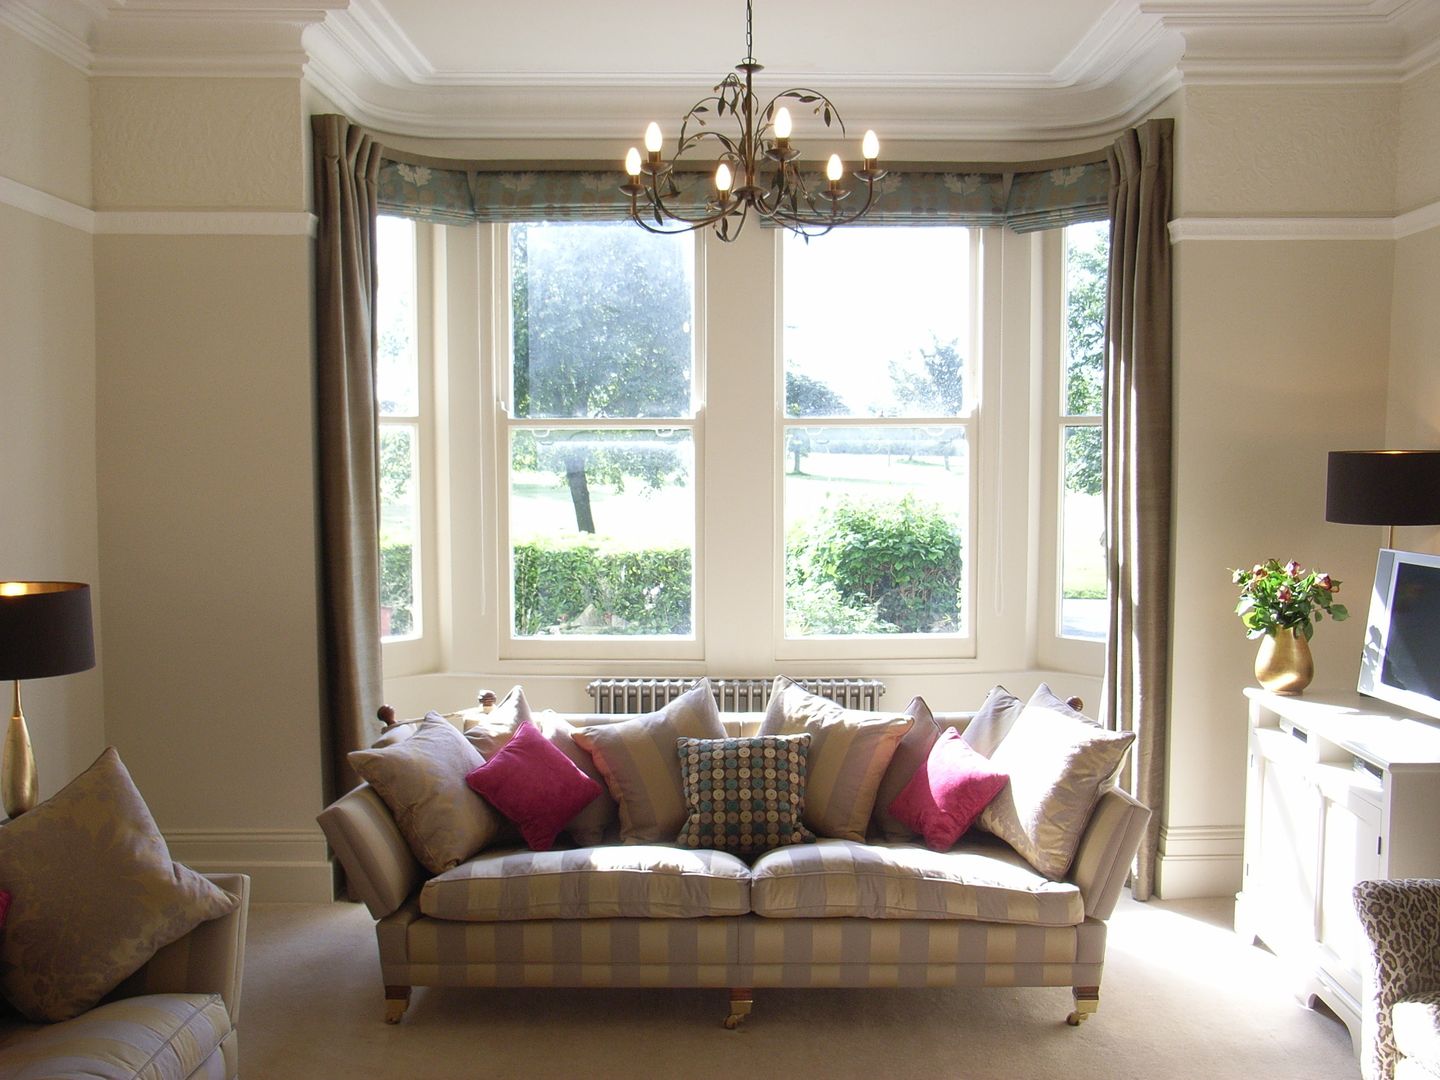 Classic View of Contemporised Victorian Living Room homify Salon classique large bay window,roman blinds,dress curtains,victorian home,victorian property,classic sofa,large sofa,taupe colour scheme,pink accents,living room decor,living room furnish